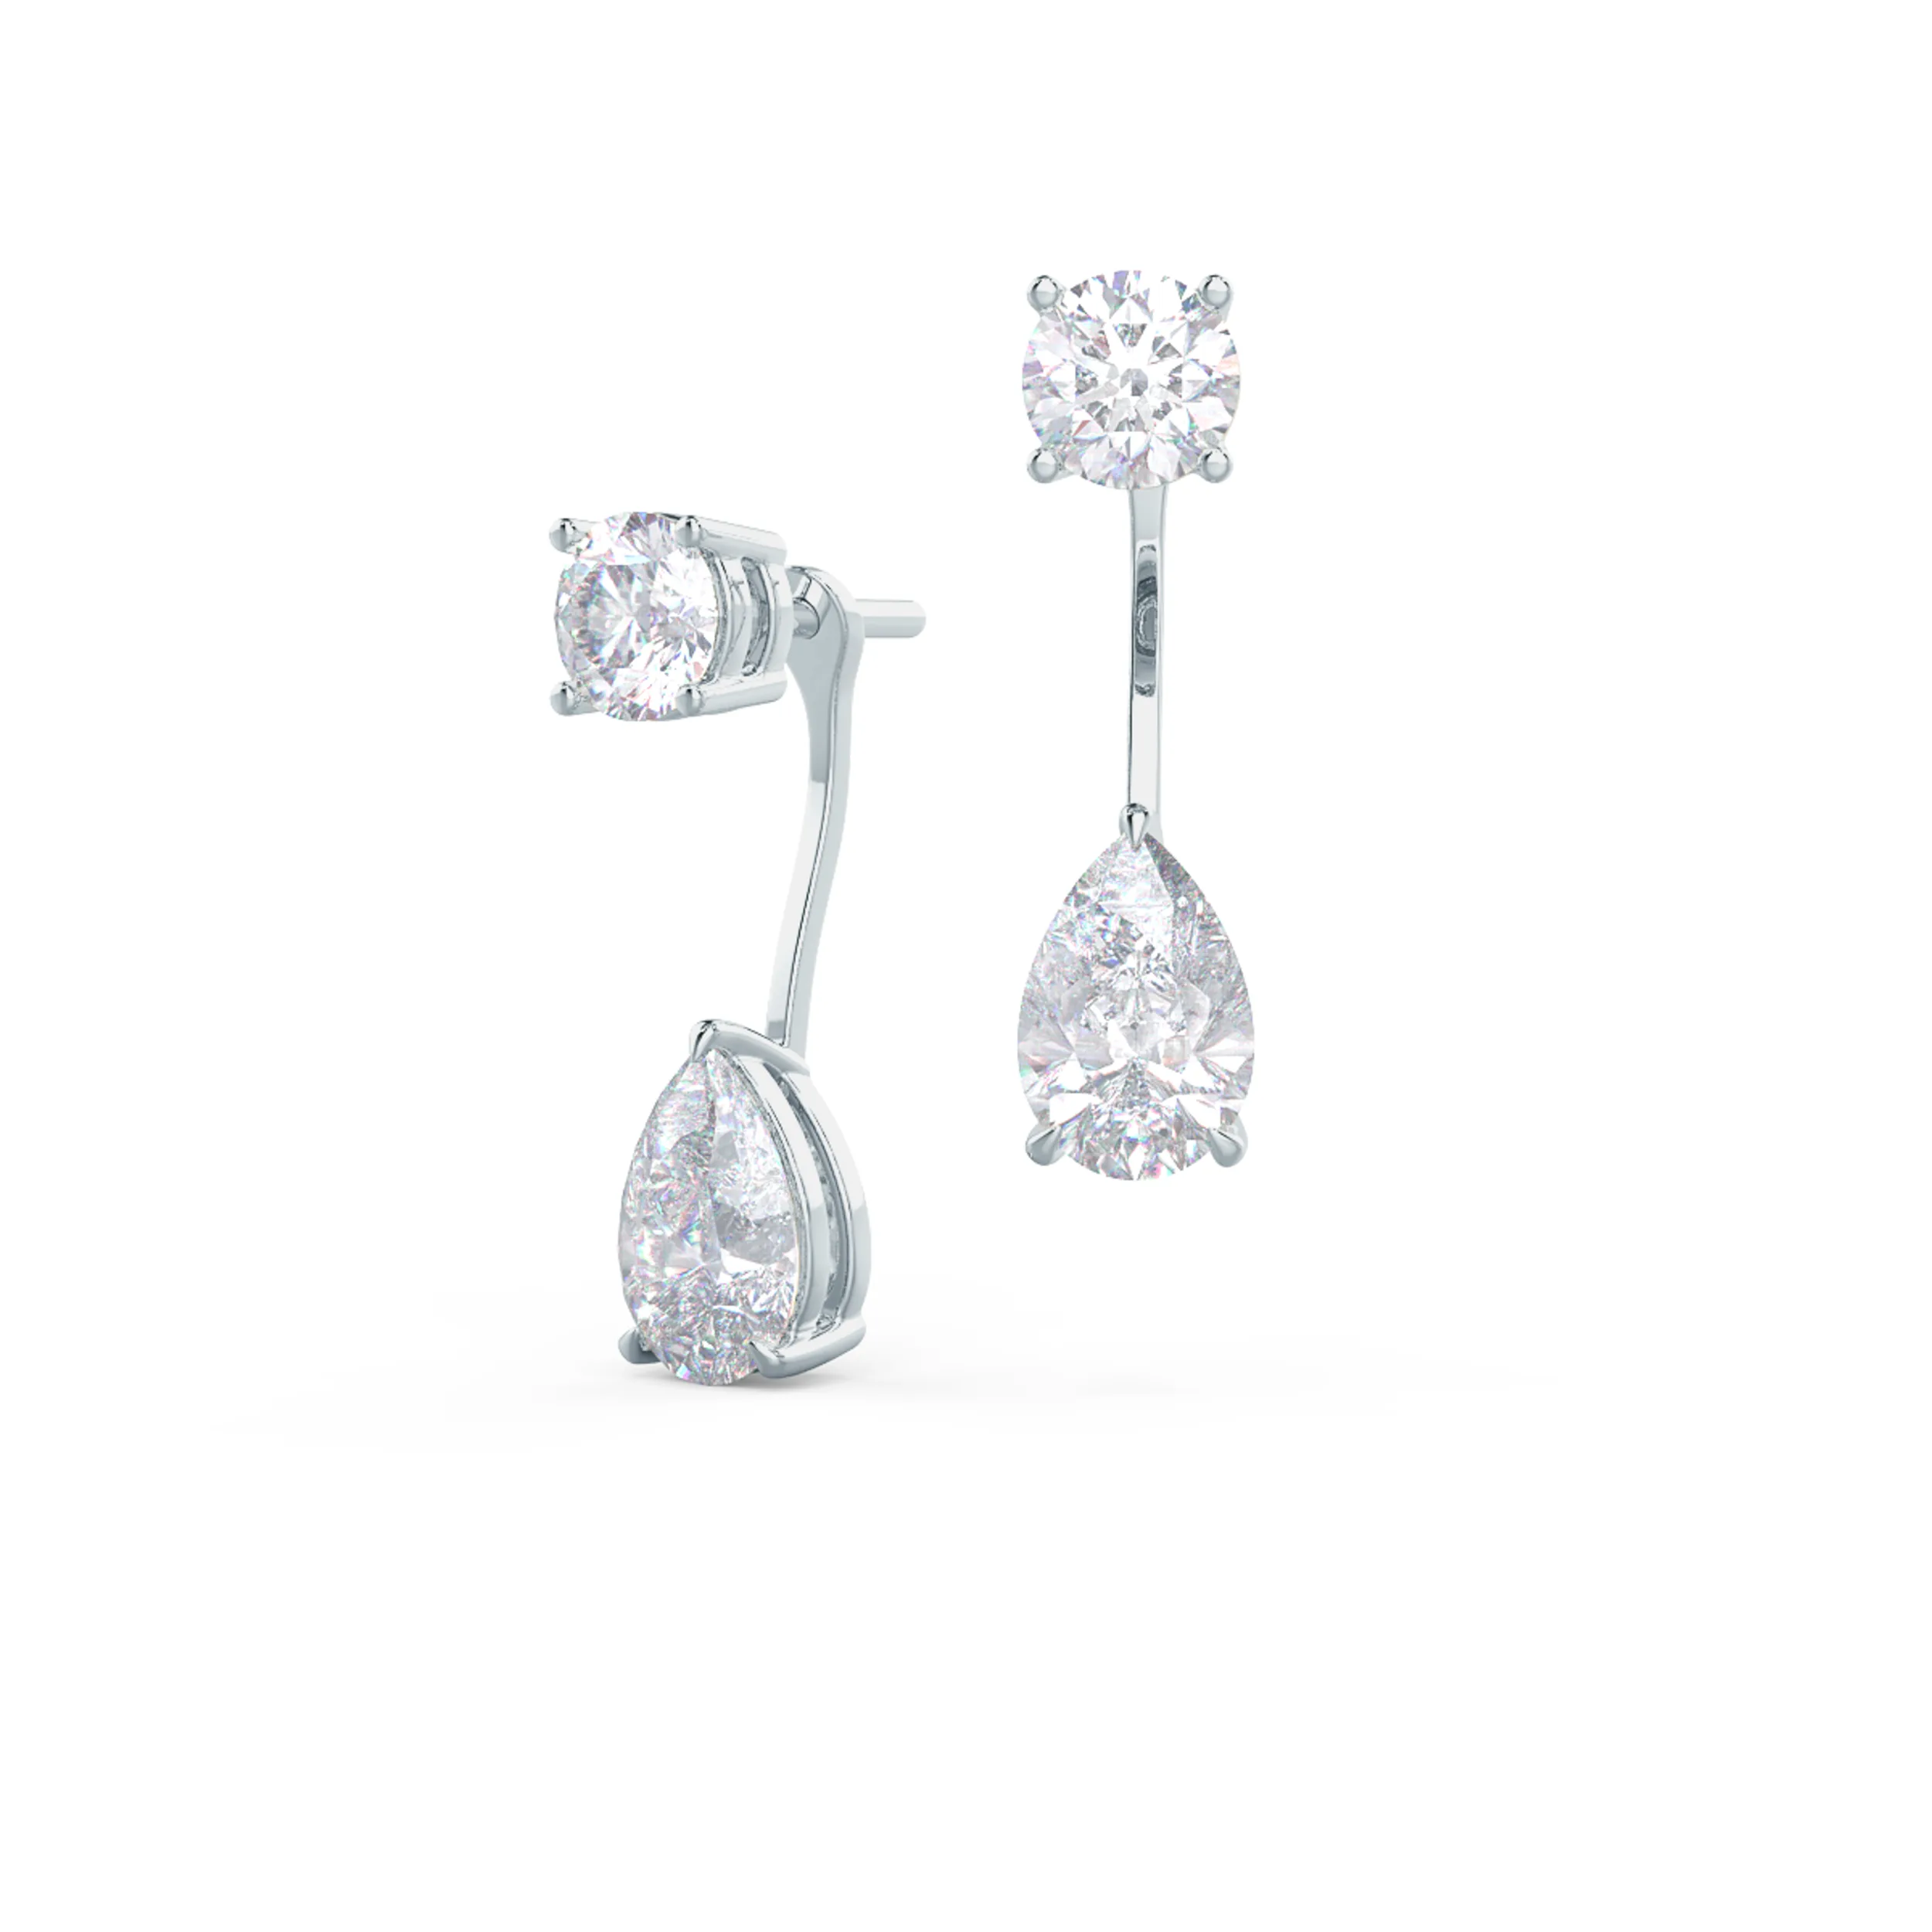 2ct pear lab diamond earring jackets white gold white background